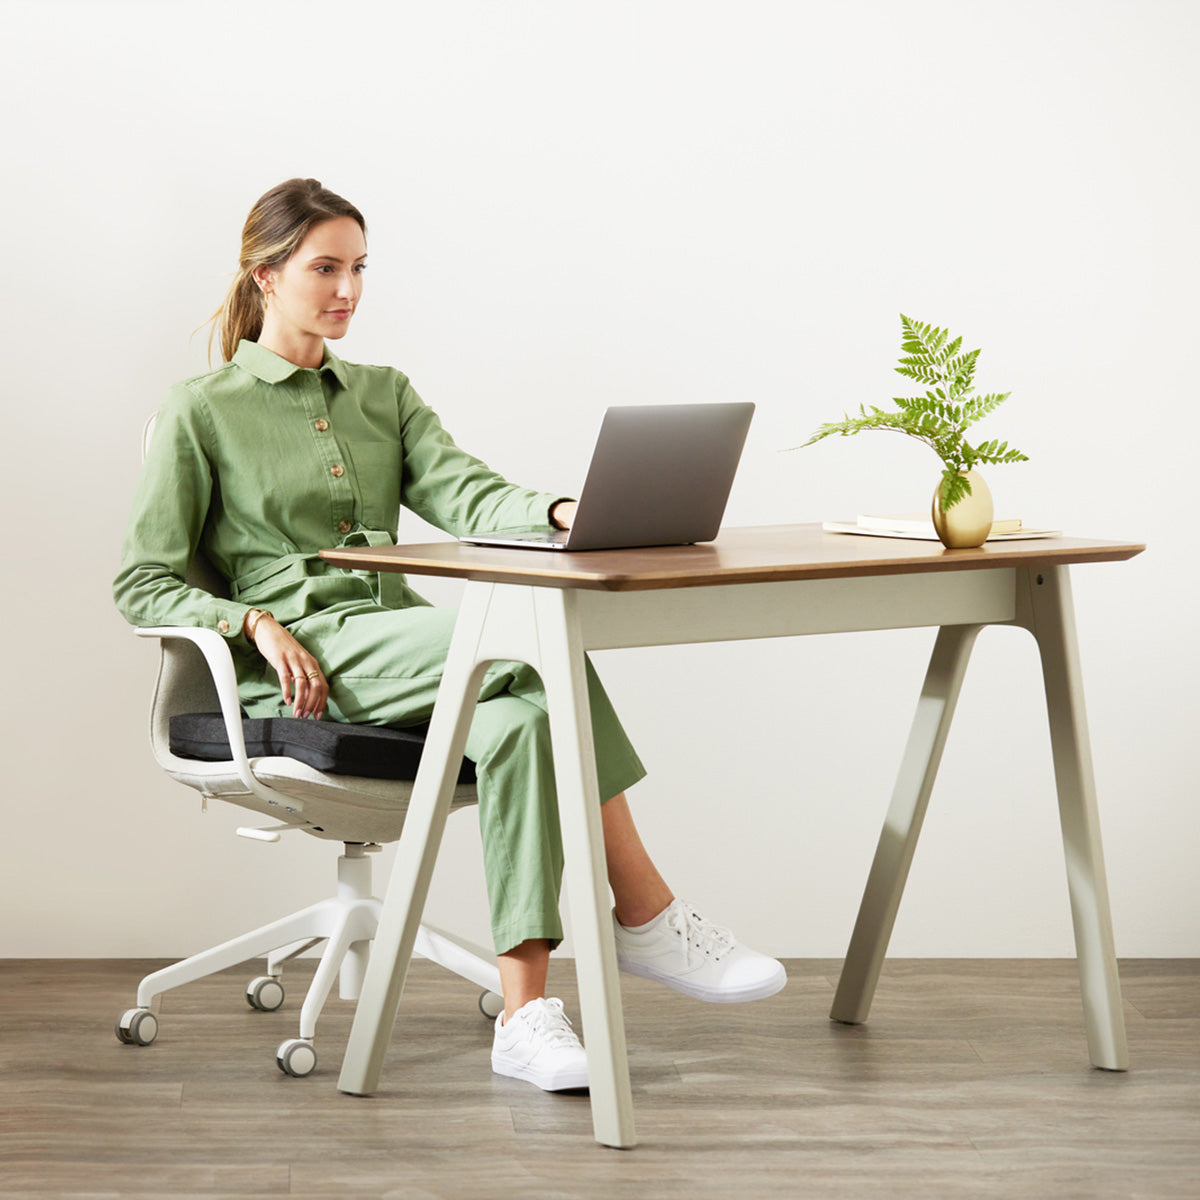 Woman Sitting On The Purple Double Seat Cushion On An Office Chair And Working On A Laptop At An Office Desk